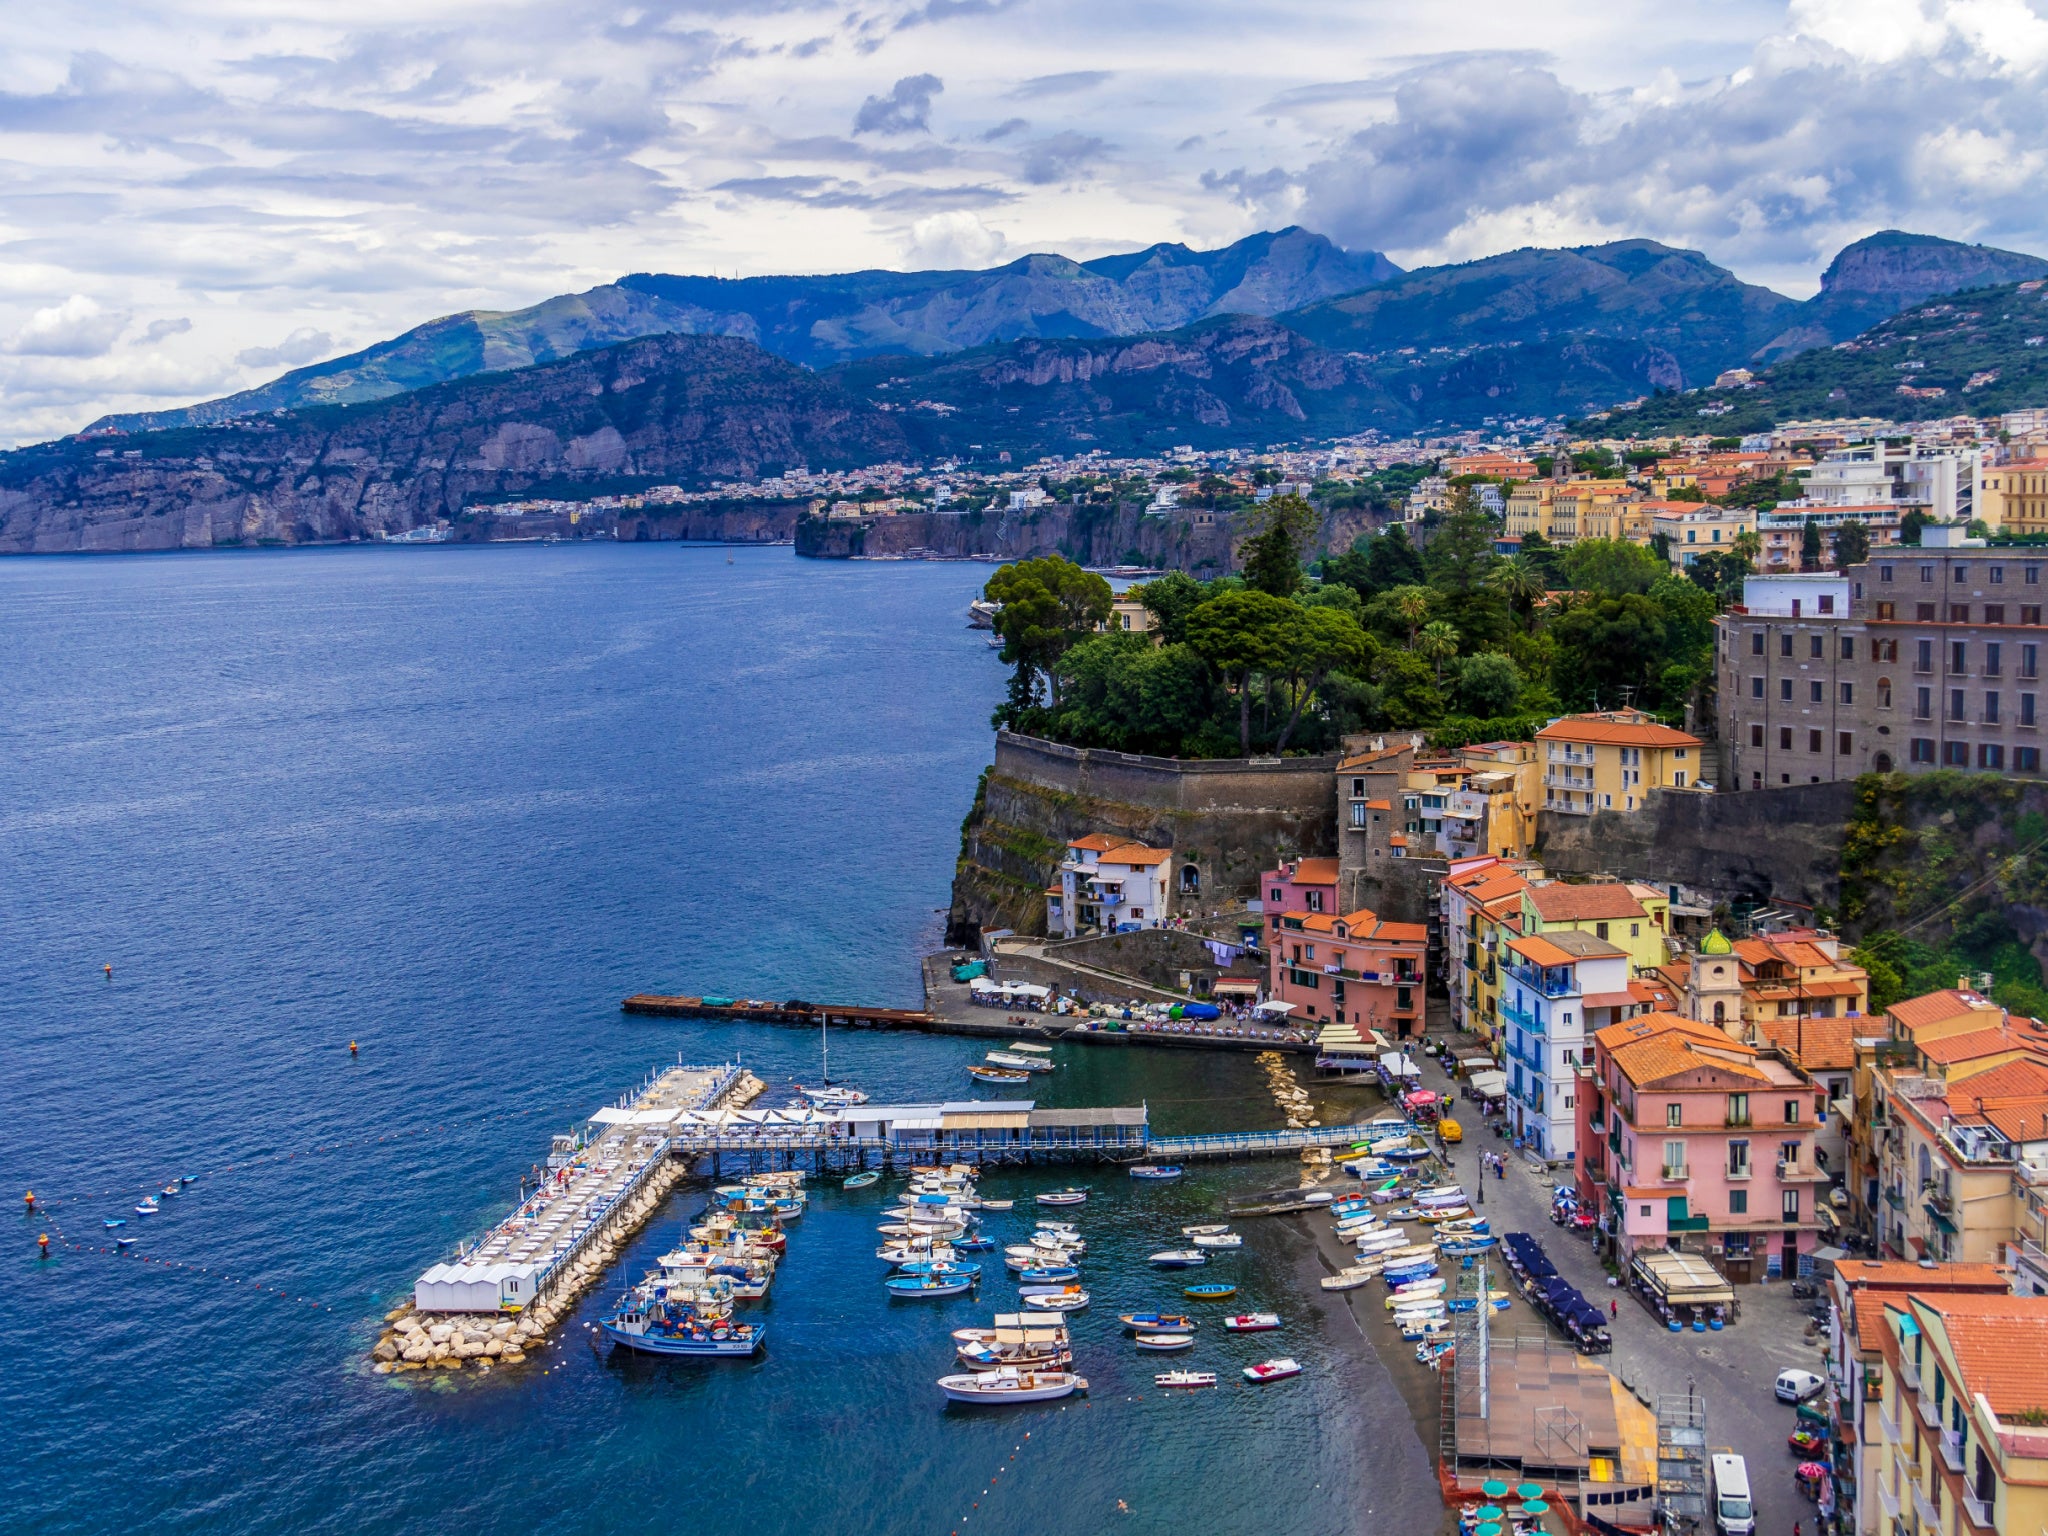 Take in the beautiful views of Sorrento before it gets too hot